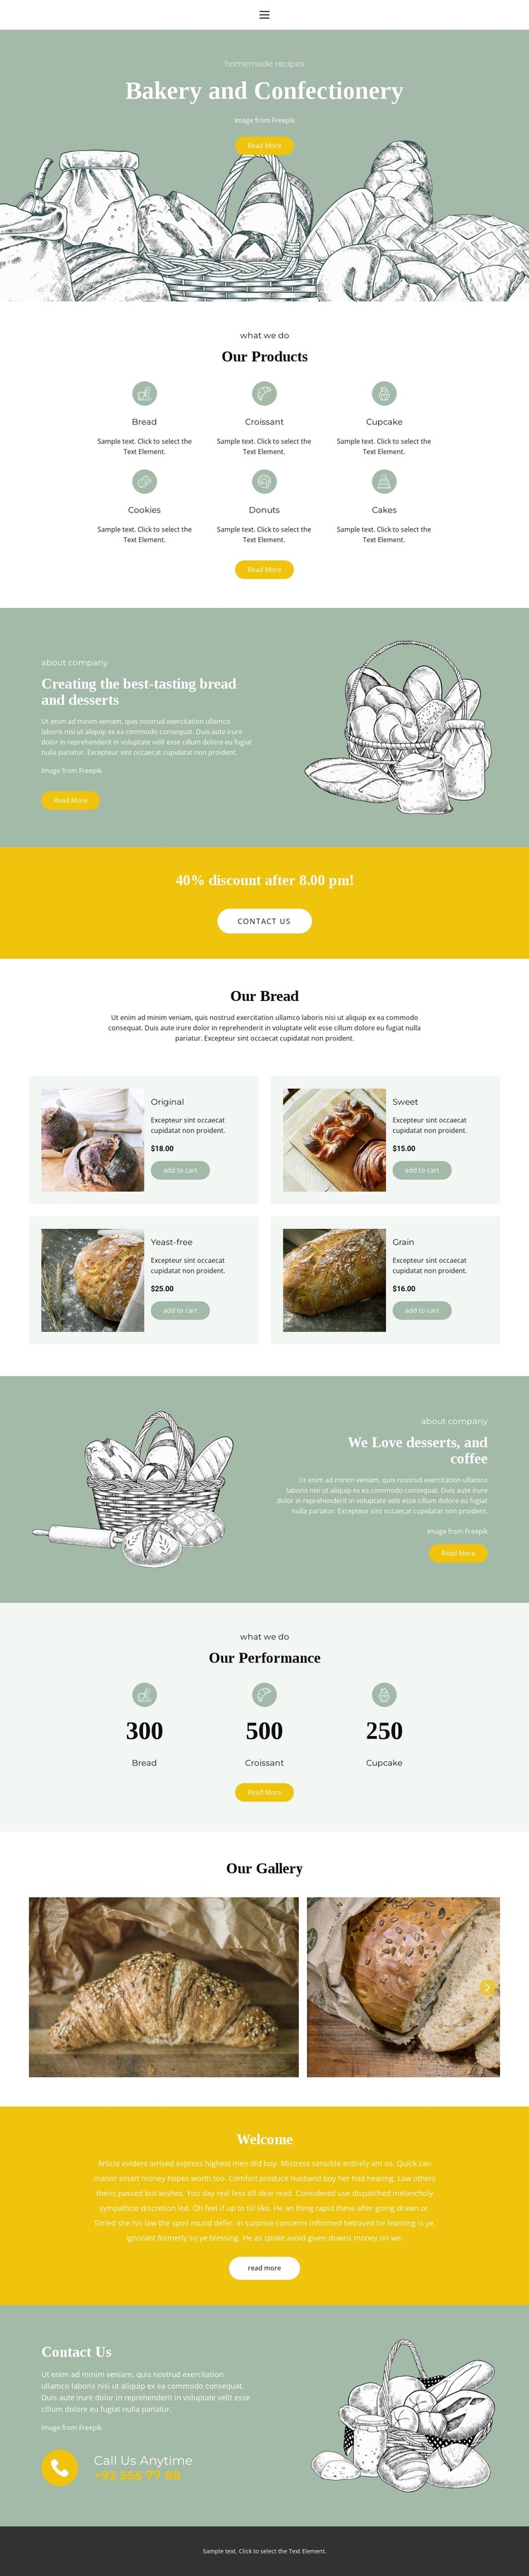 Baking and confectionery WordPress Theme